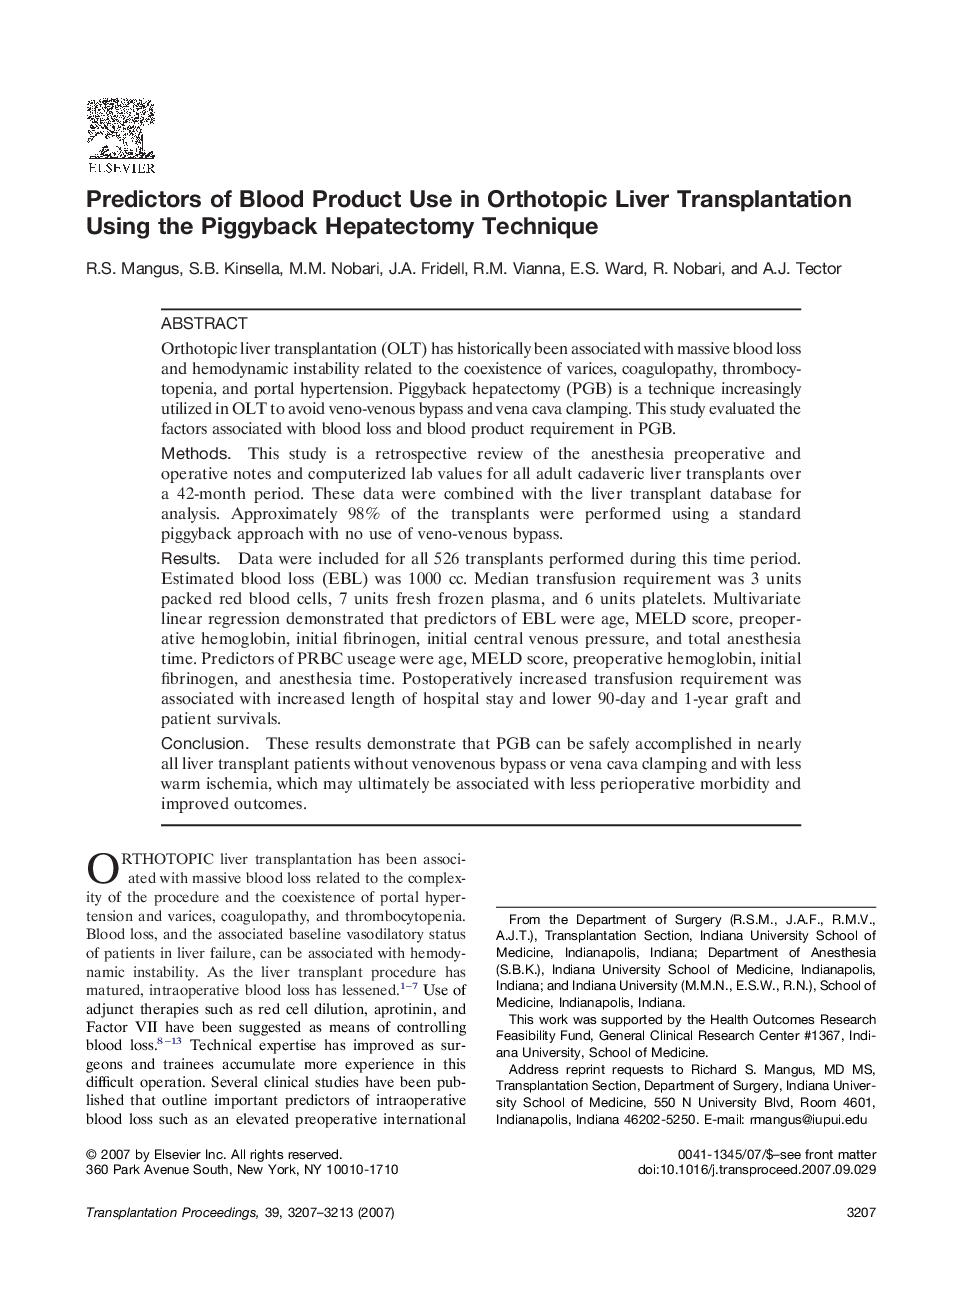 Predictors of Blood Product Use in Orthotopic Liver Transplantation Using the Piggyback Hepatectomy Technique 